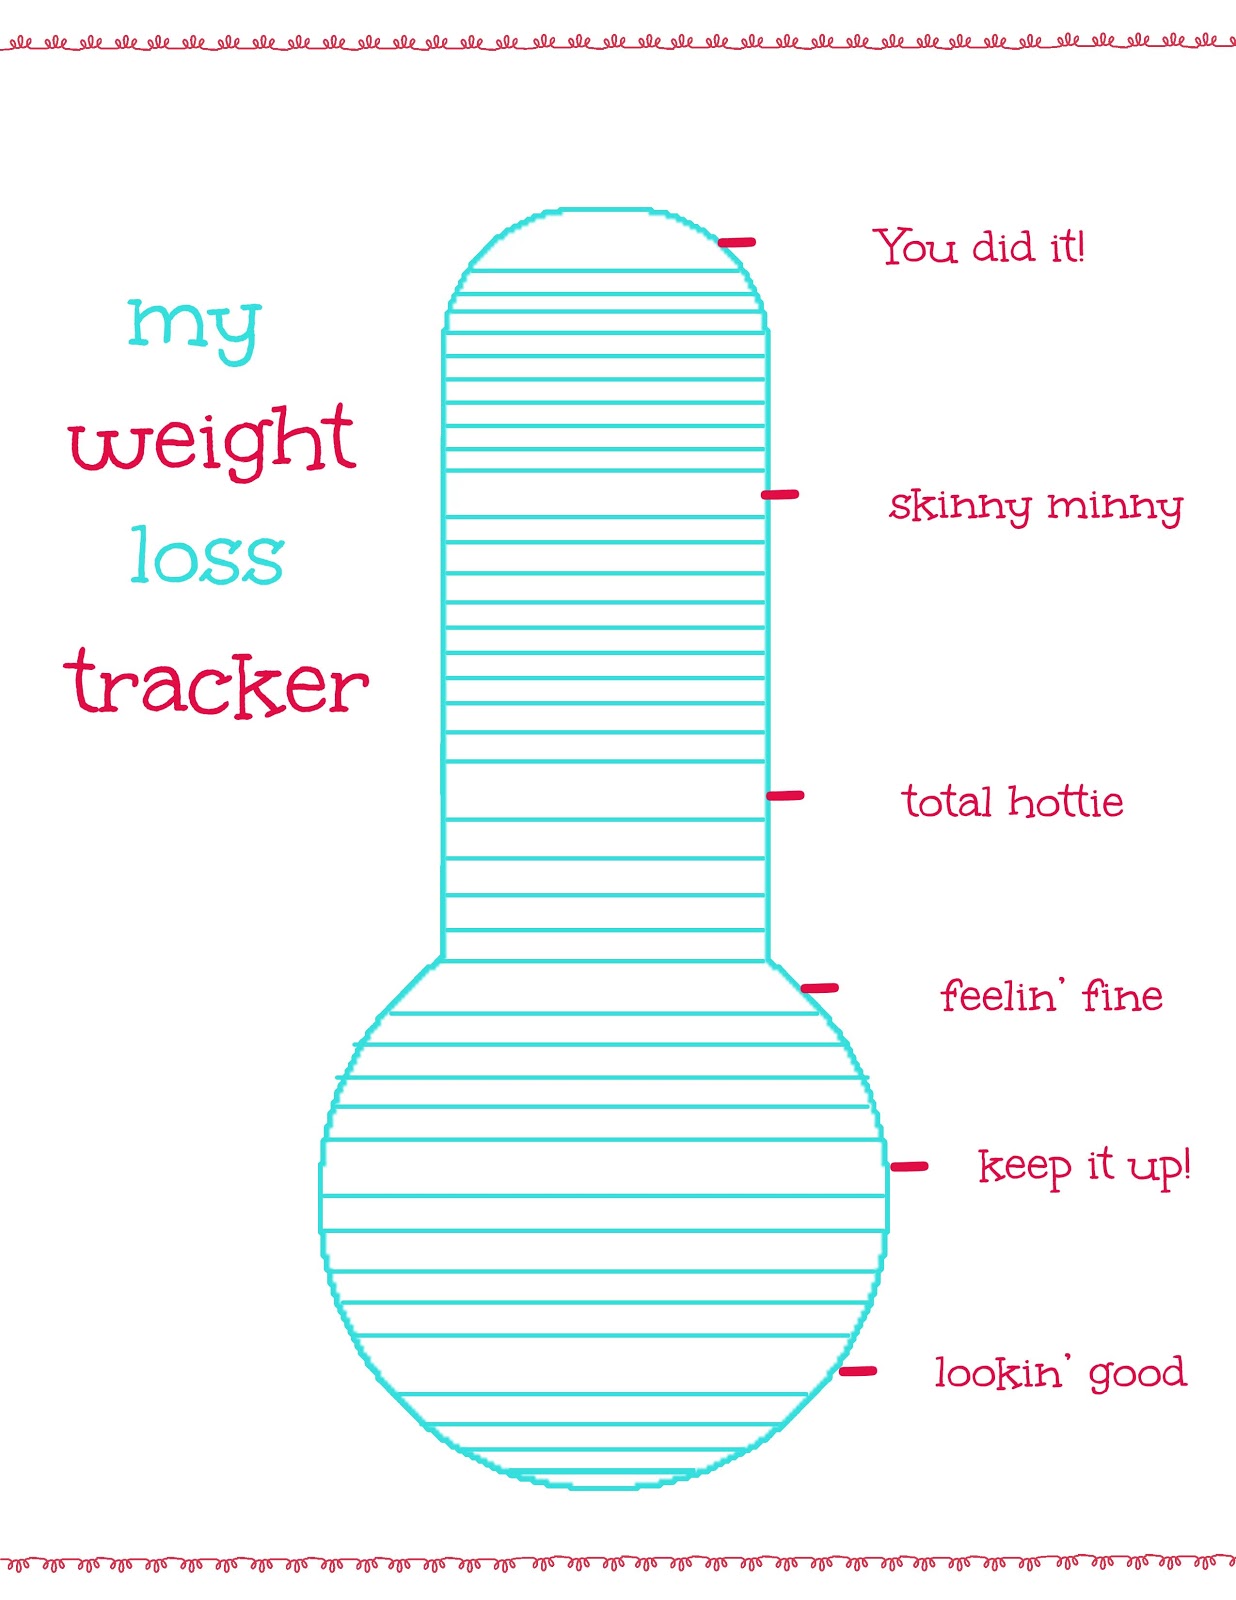 cashing-in-on-life-free-weight-loss-tracker-printable